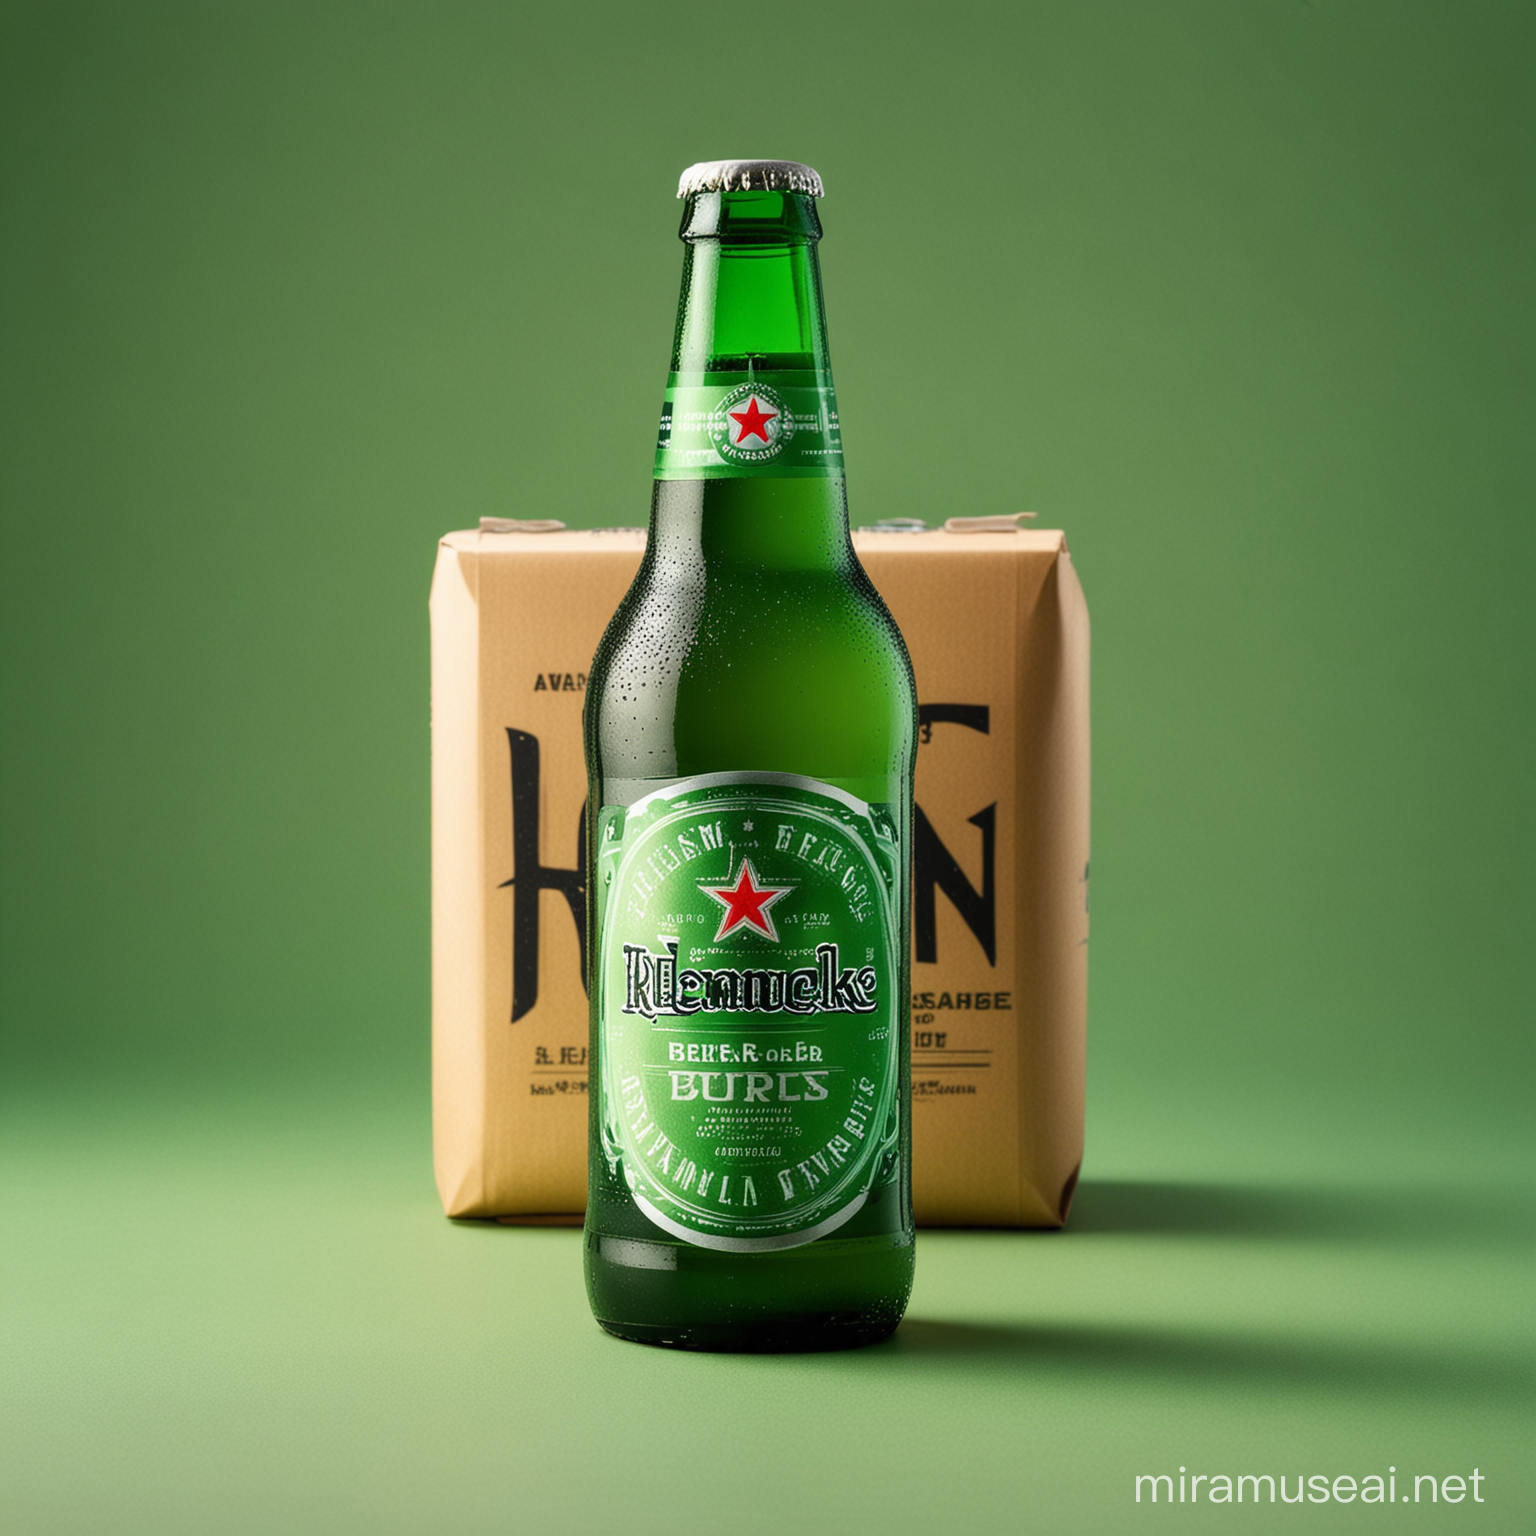 Modern craft brewery equipment in a Heineken green background with a 355ml bottle in the middle of the picture. I want to showcase the beer of the week to customers and stakeholders. The beer style is Cream Ale and the language is Portuguese. 